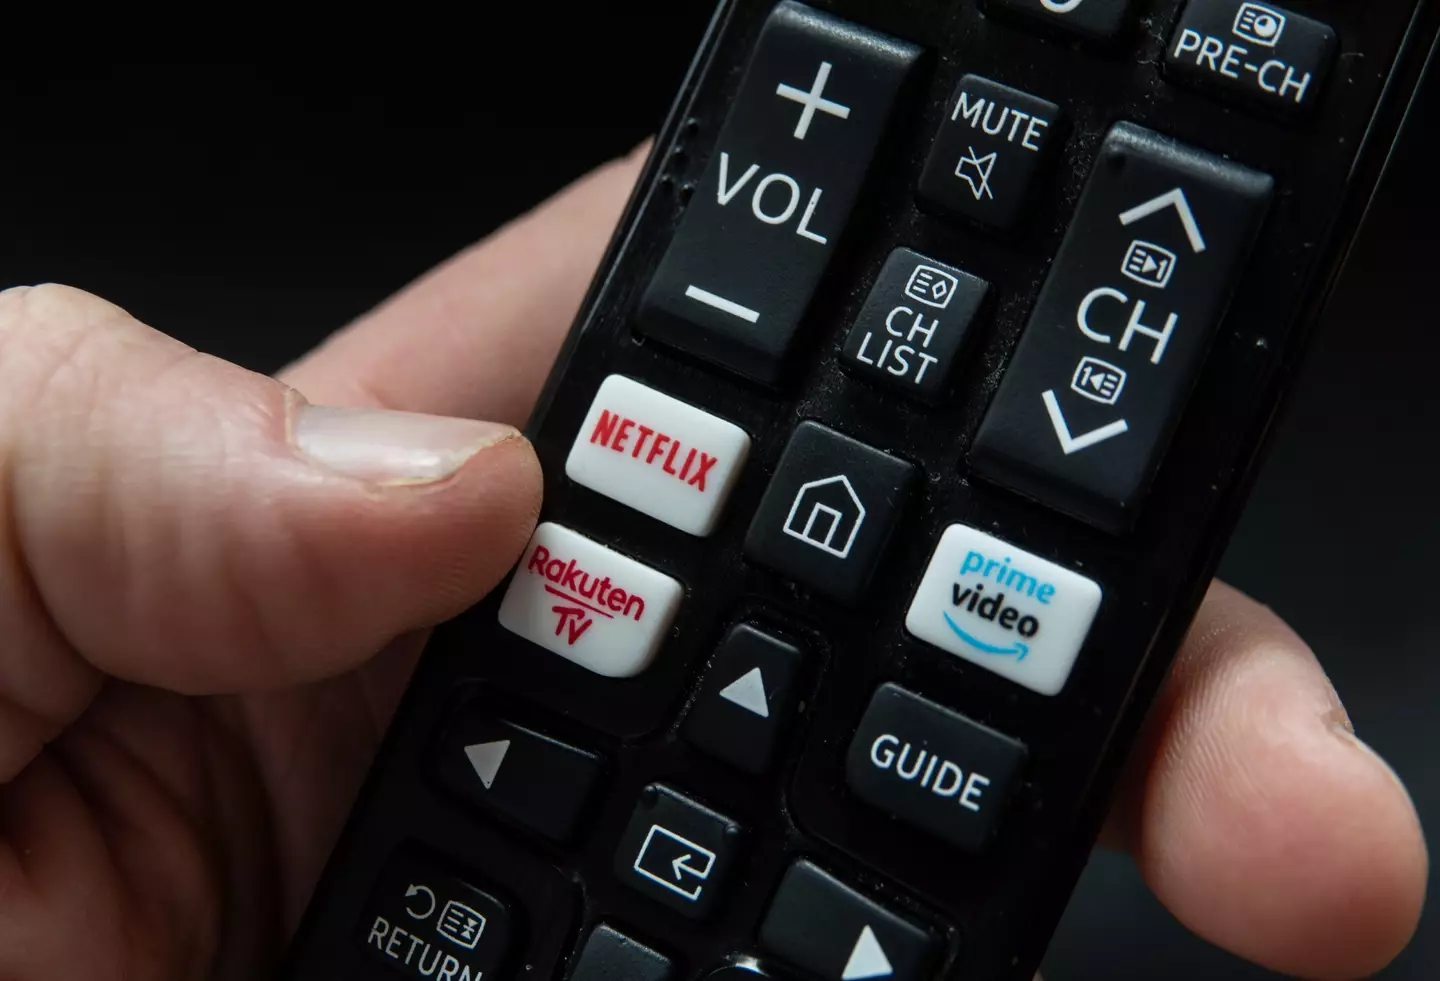 A smart TV remote that can play Netflix. (Matt Cardy/Getty Images)